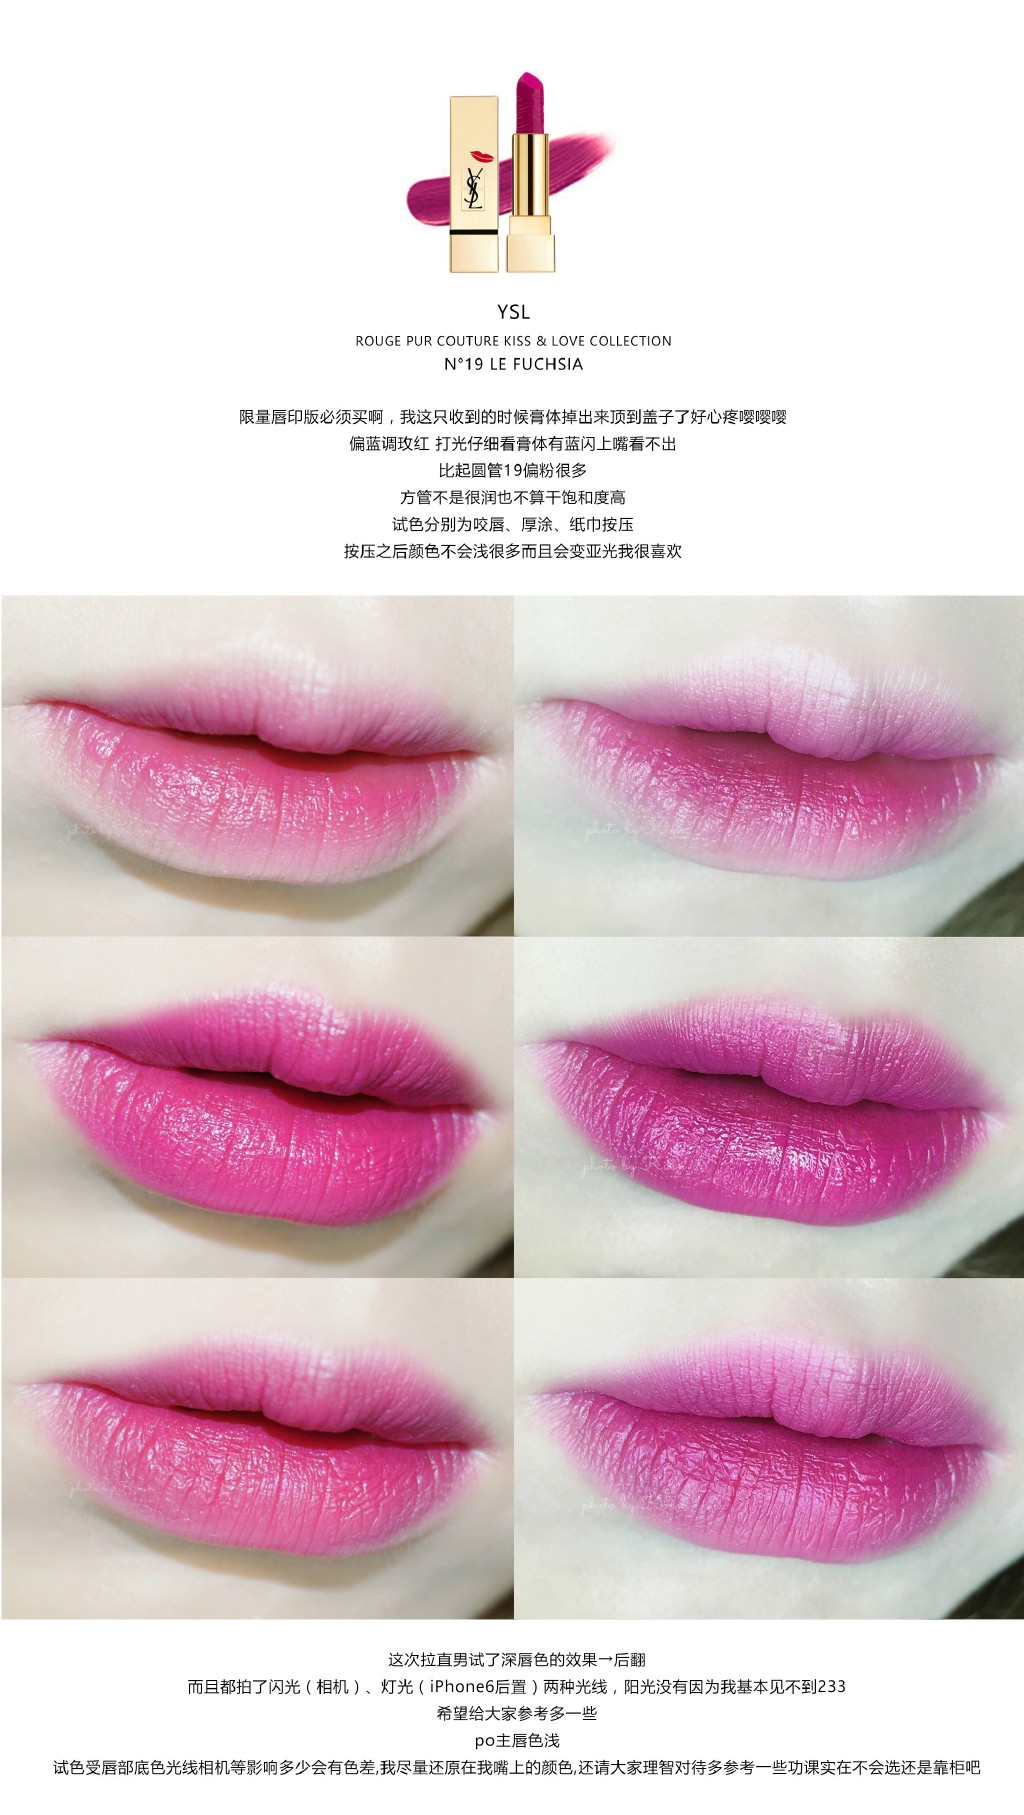 YSL ROUGE PUR COUTURE KISS & LOVE COLLECTION 19 le fuchsia、ROUGE VOLUPTé SHINE 19 fuchsia in rag ...